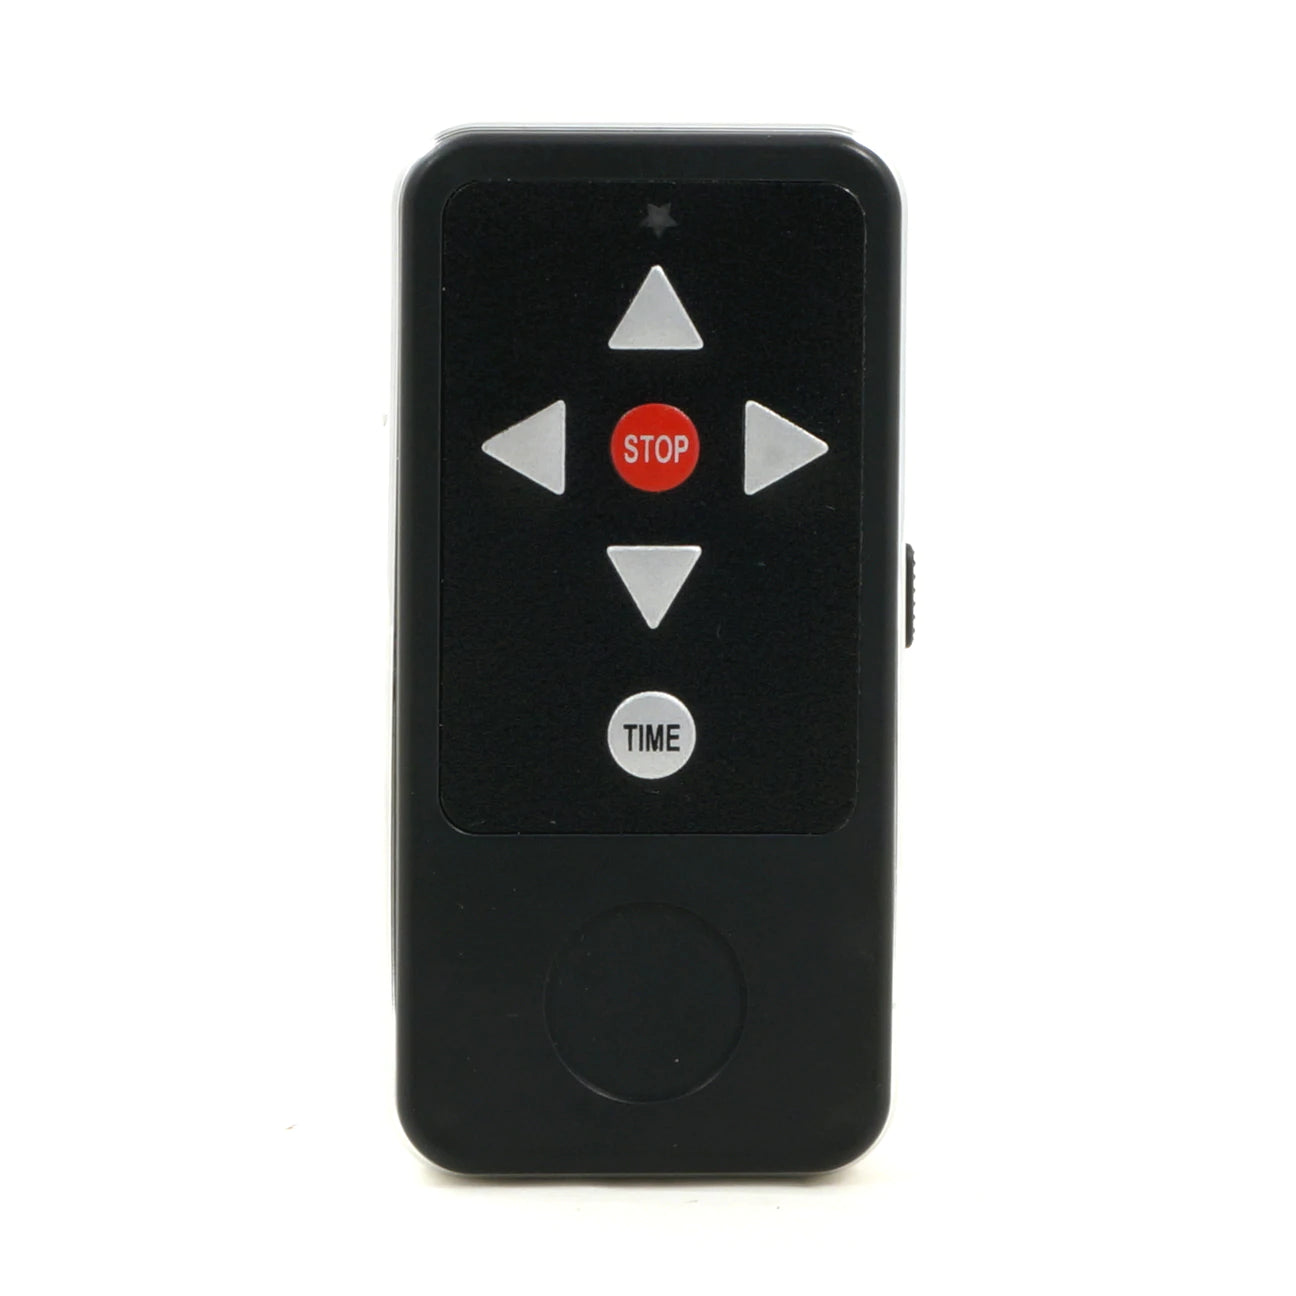 Remote control for GT series